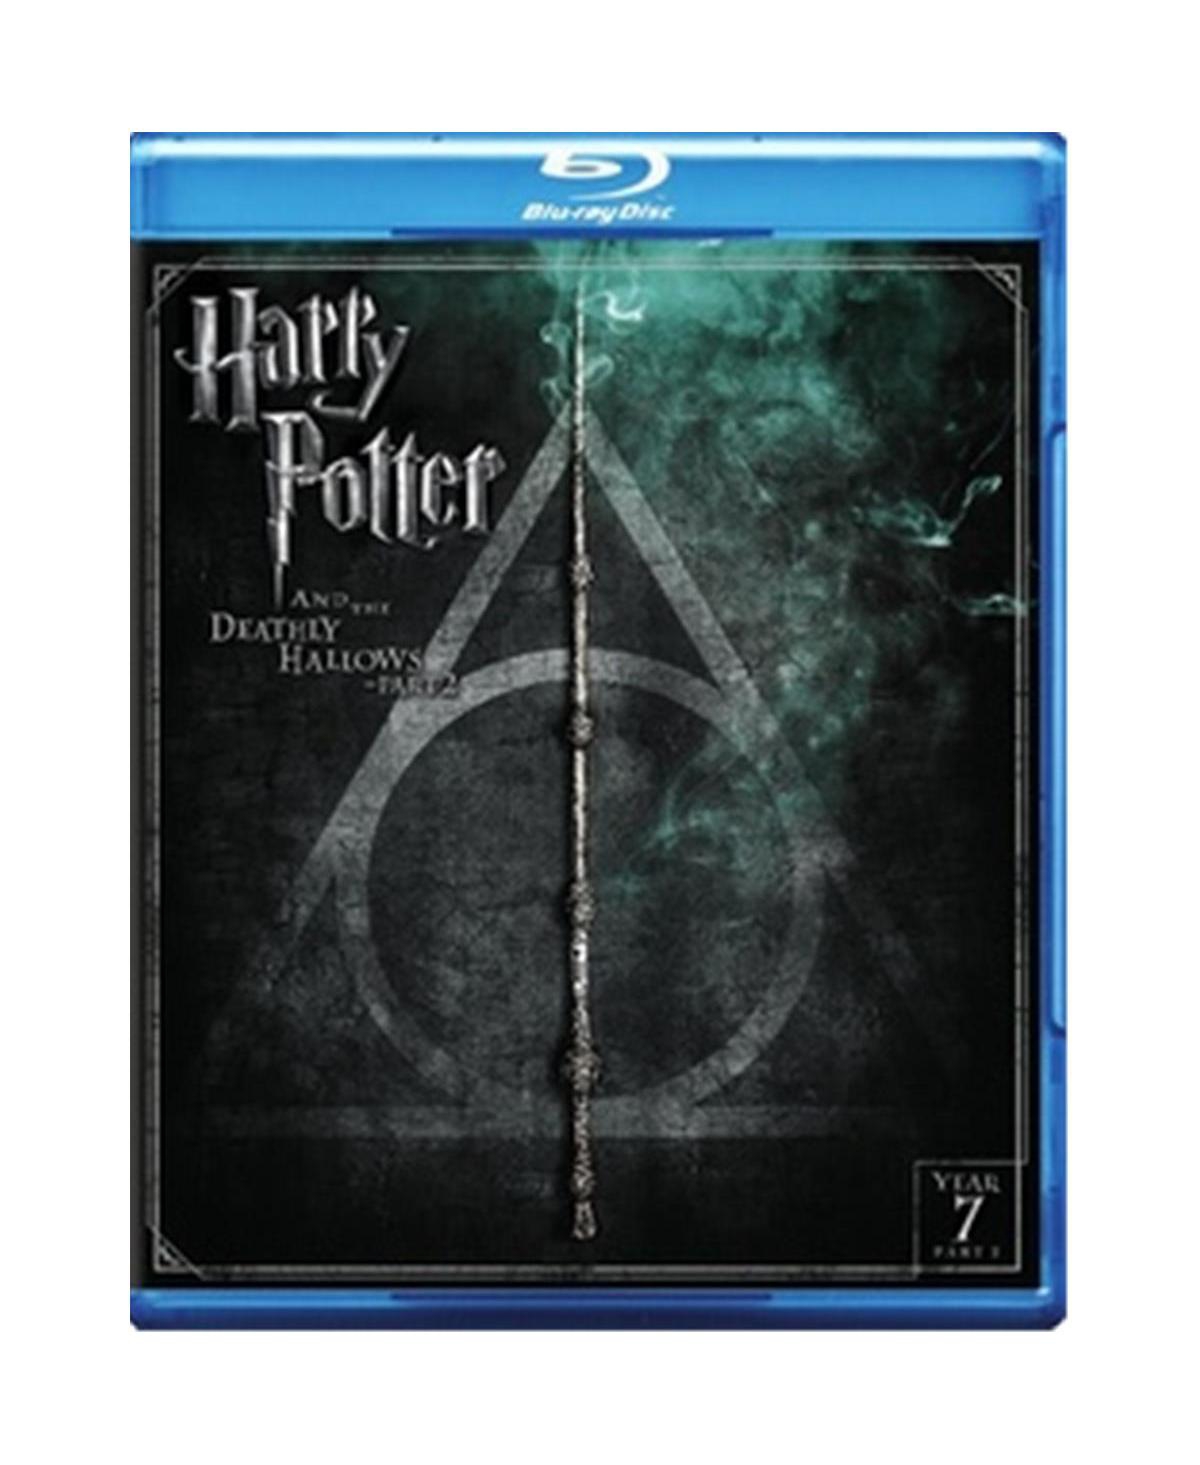 Warner Bros Warner Home Video Harry Potter & The Deathly Hallows Part 2 Dvd In White